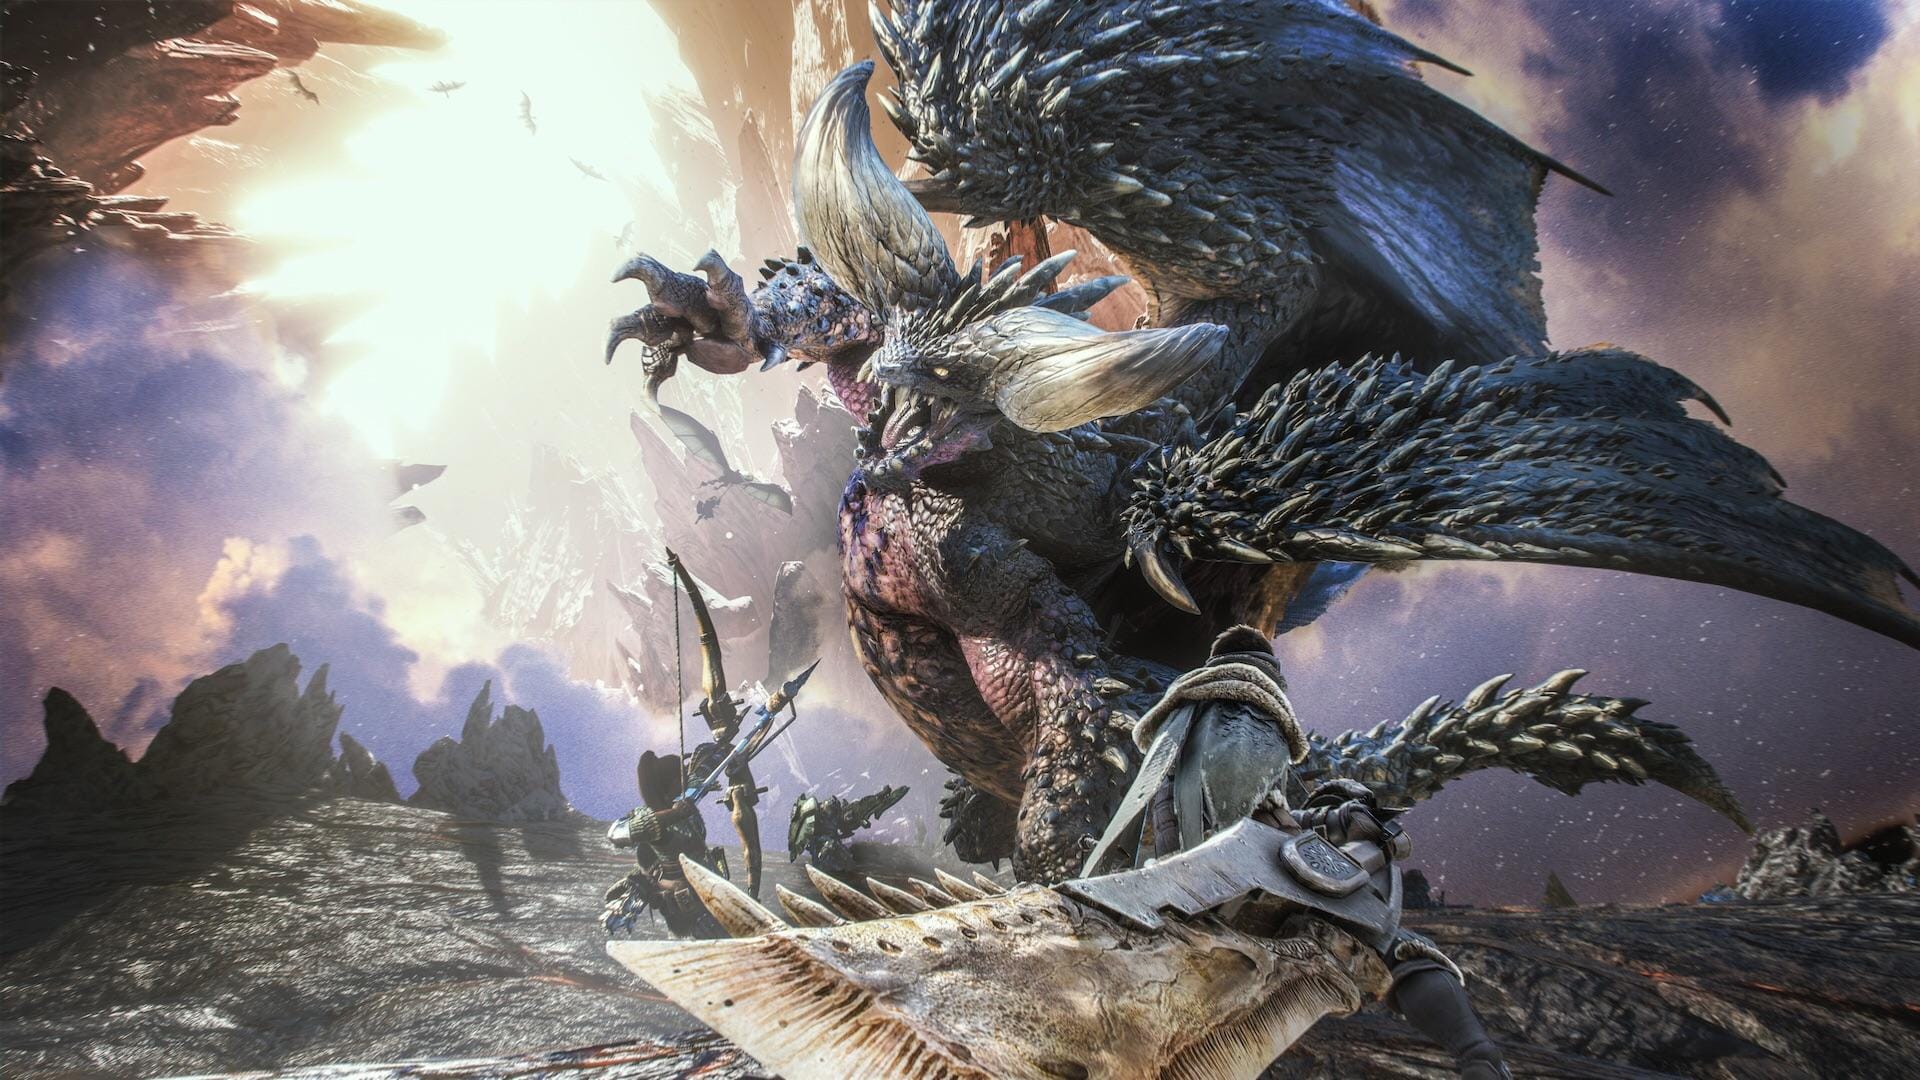 Thoughts on a open world monster hunter game based on the lore of the  ancient civilization? (Or at least a game that follows the lore of the  ancient civilization) : r/MonsterHunter